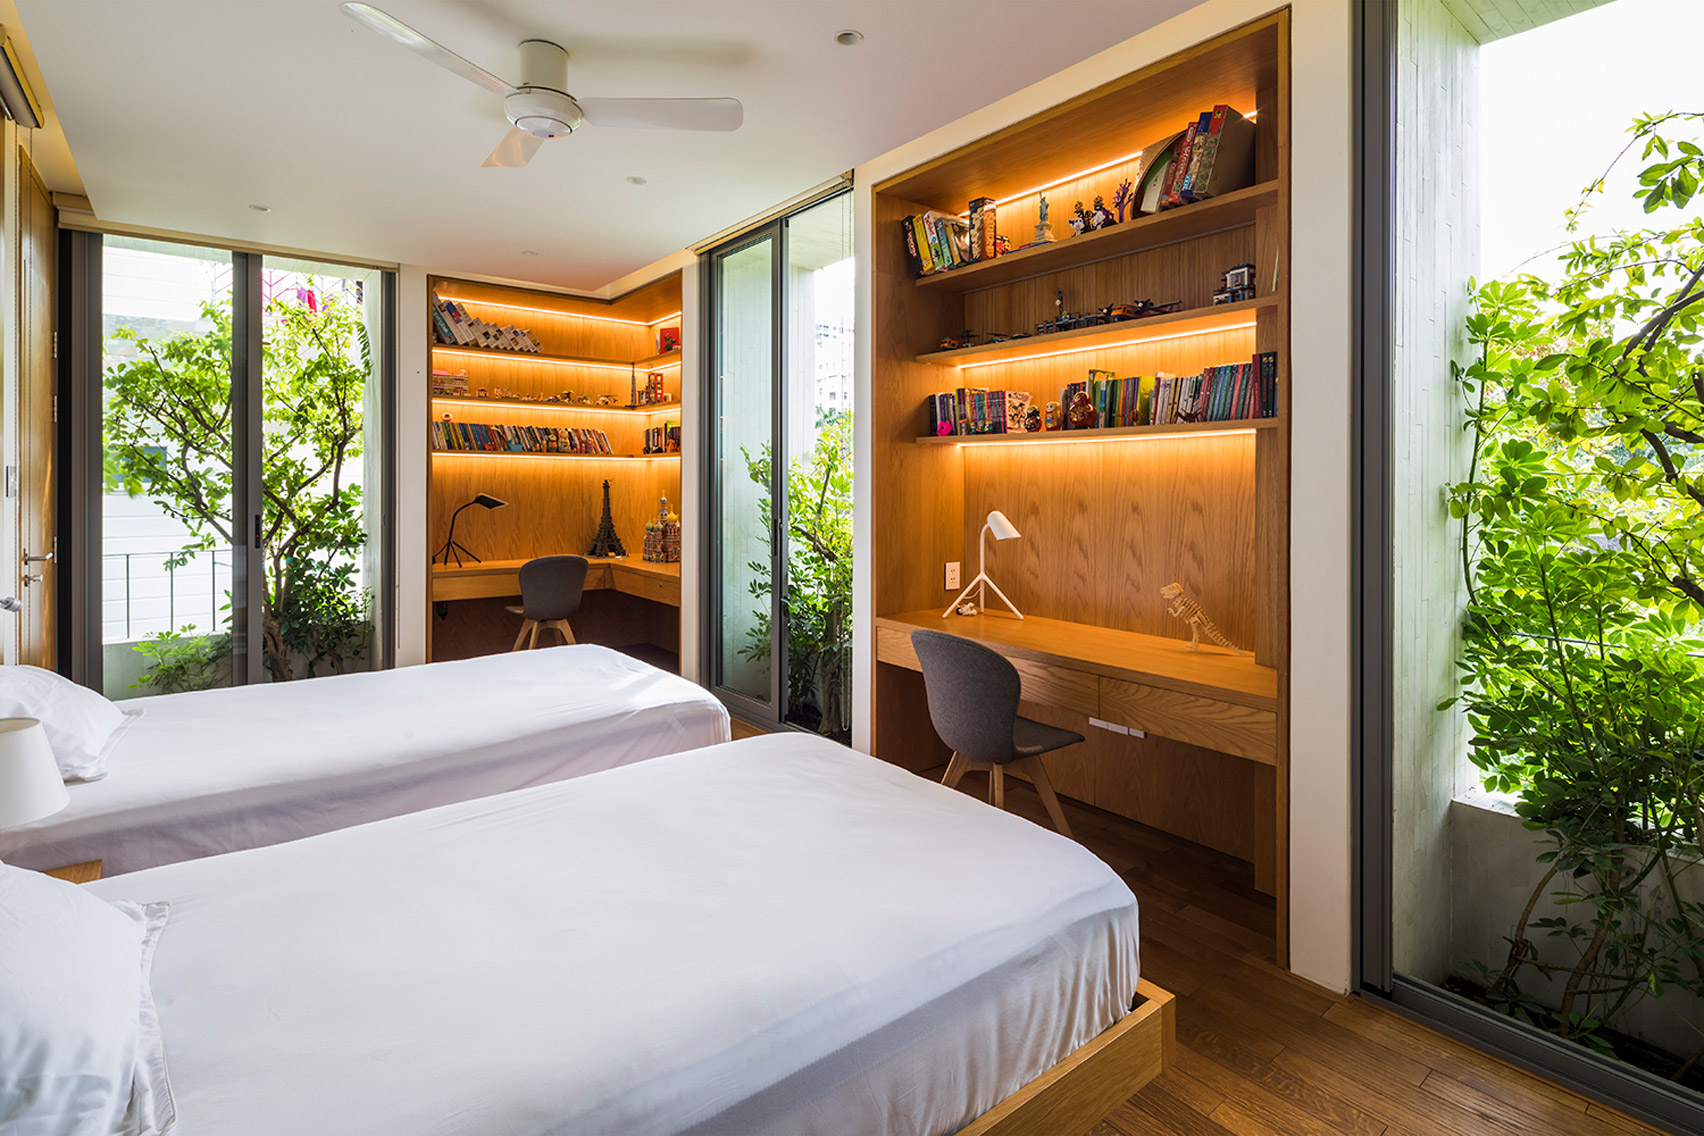 Bedroom in Stepping Park House by Vo Trong Nghia in Ho Chi Minh City, Vietnam